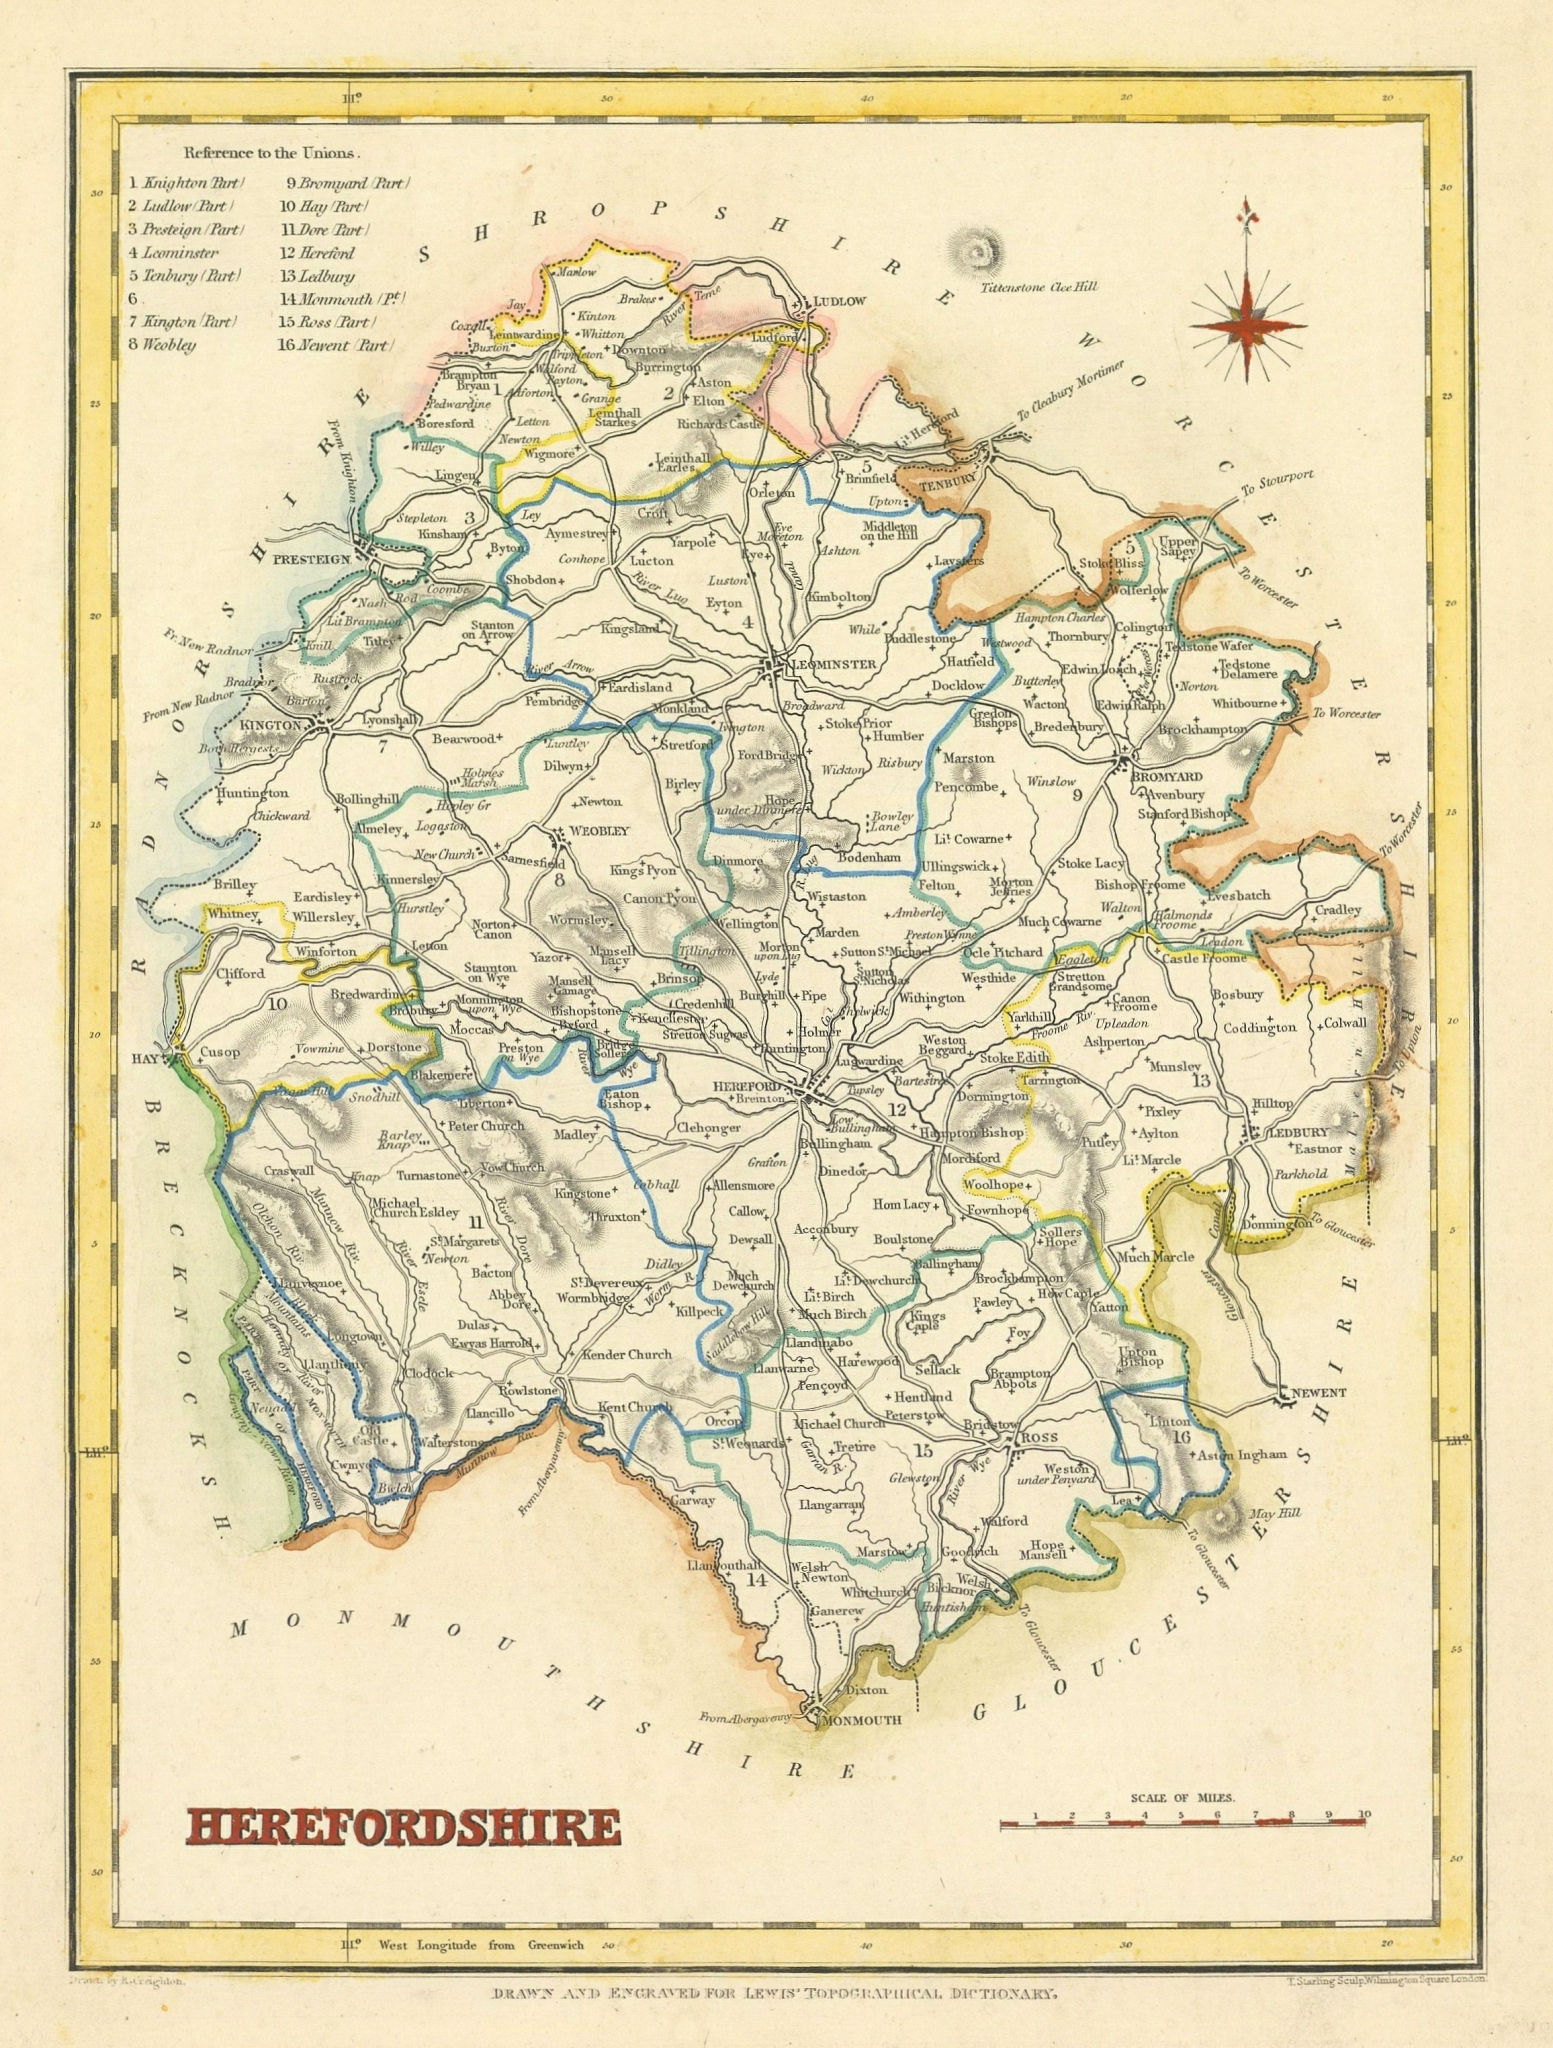 Associate Product Antique county map of HEREFORDSHIRE by Creighton & Starling for Lewis c1840